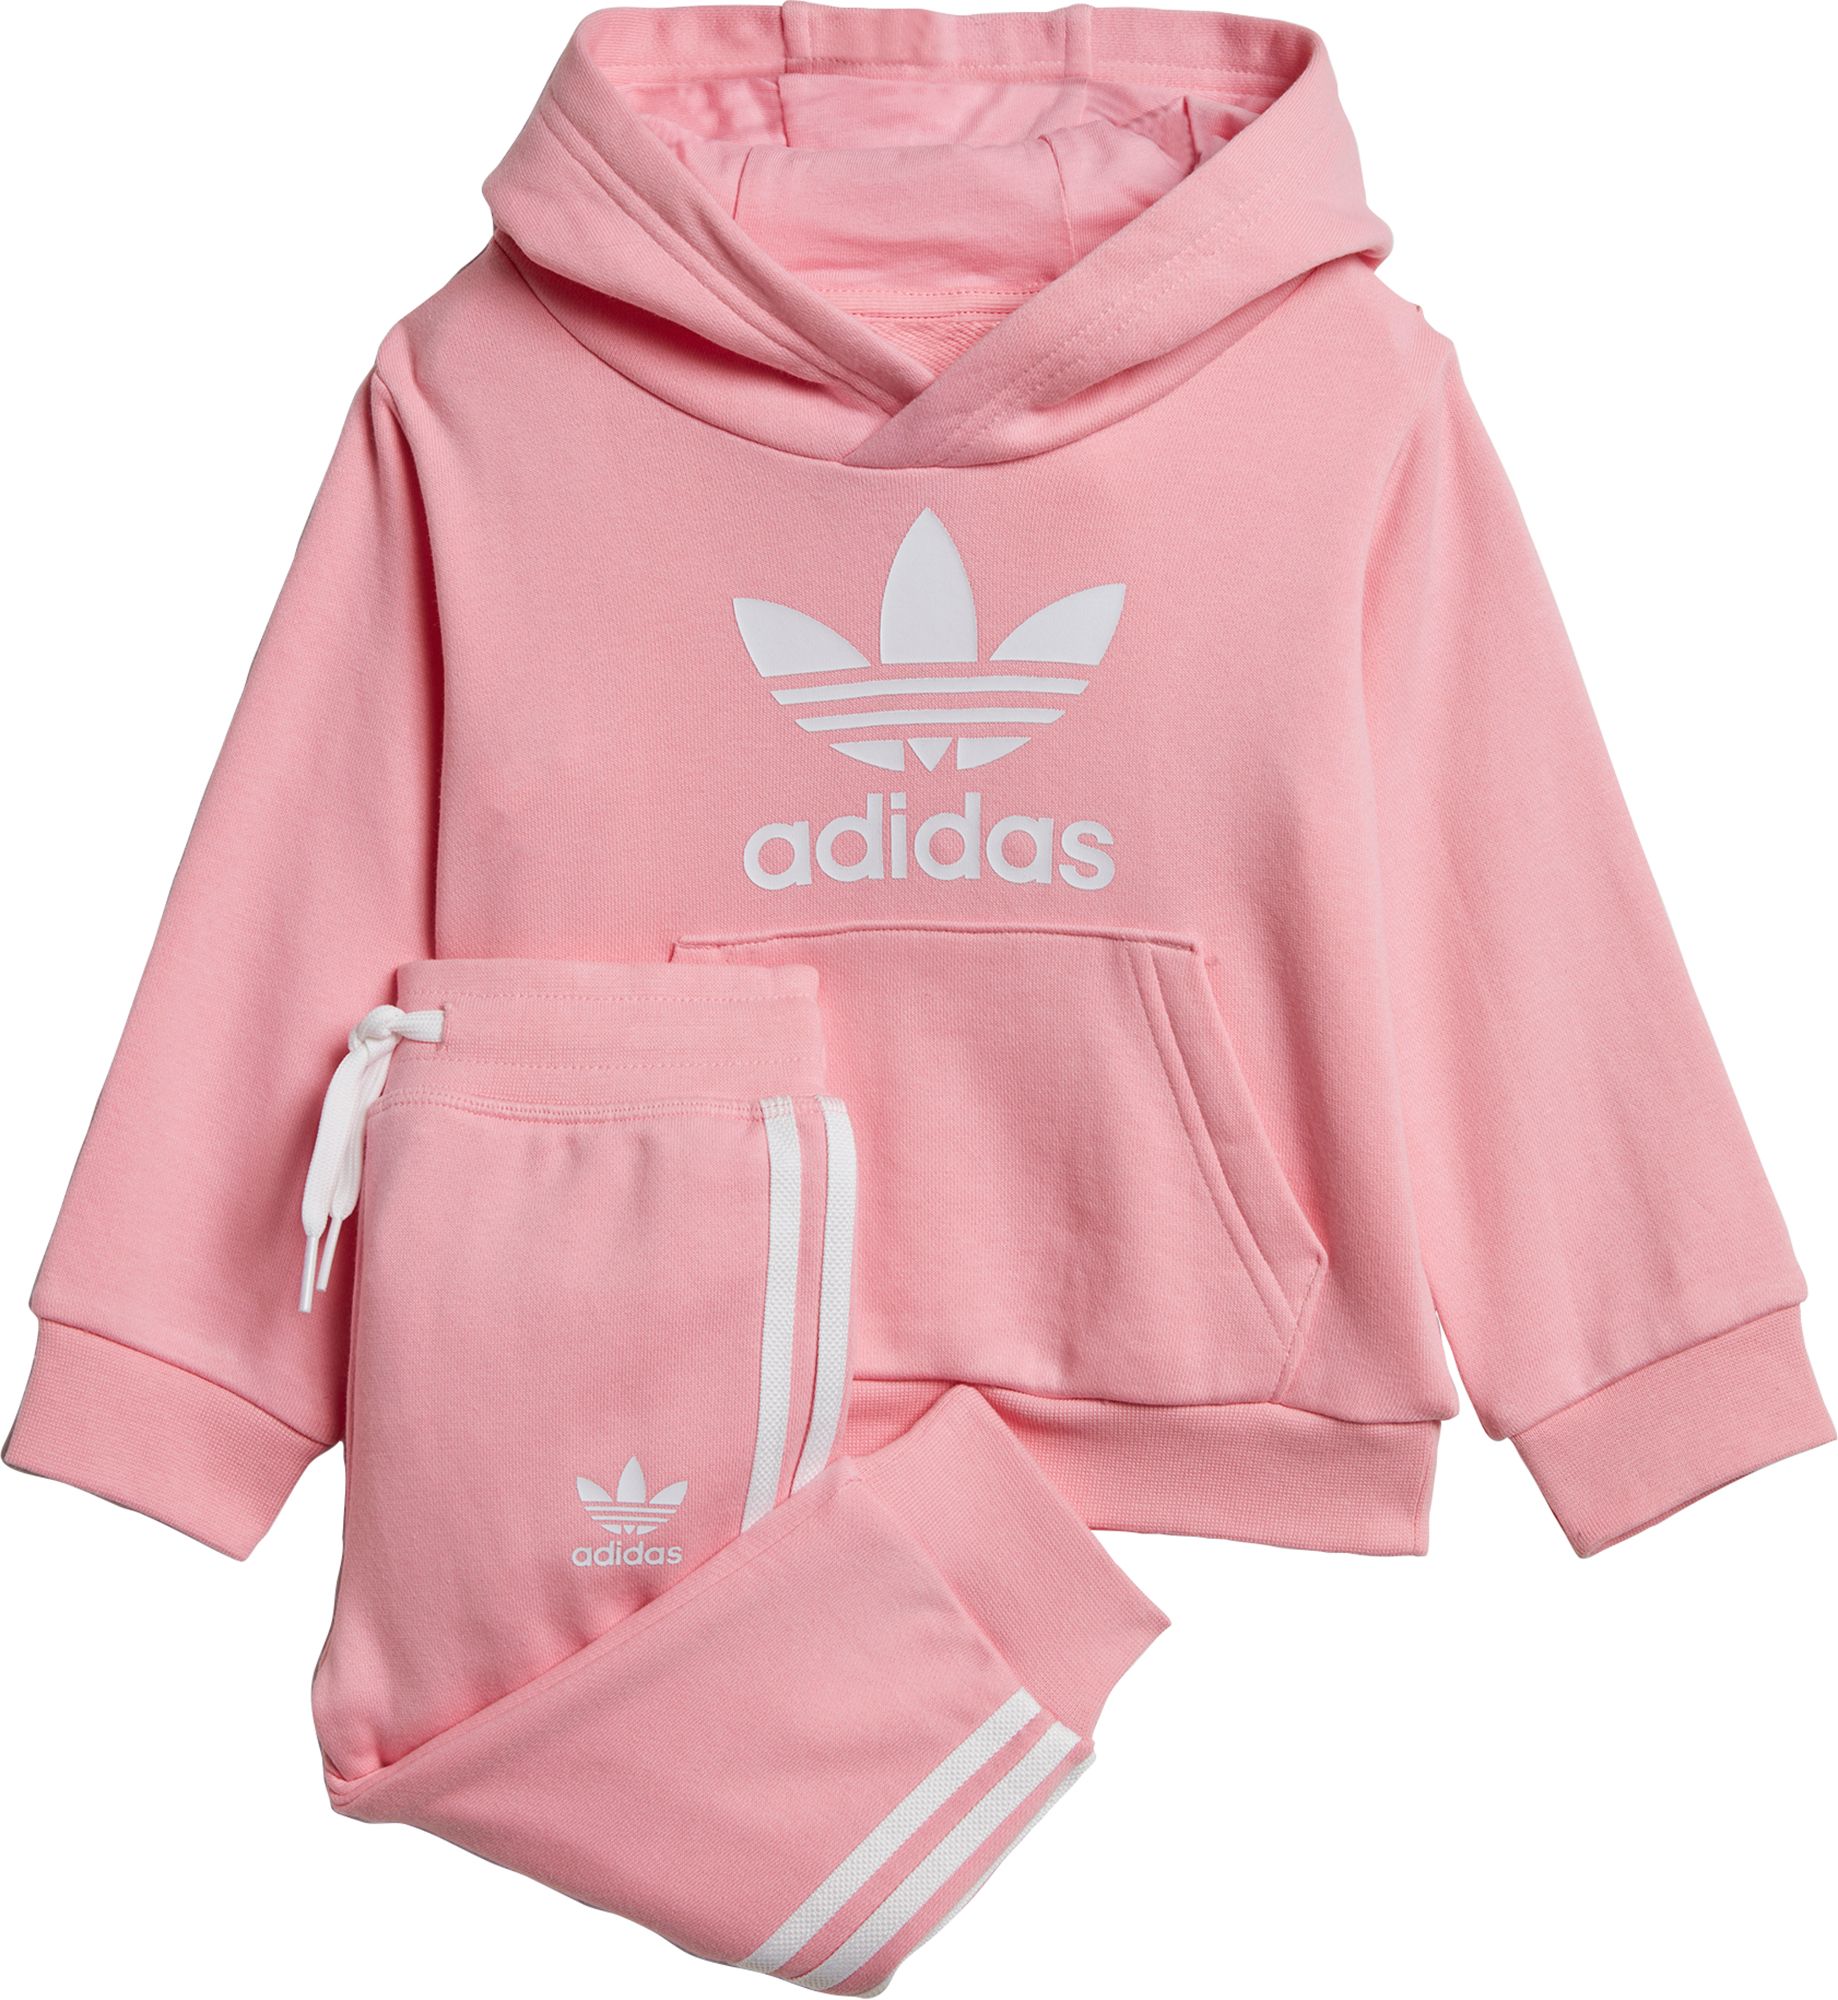 1st birthday clothes for baby girl